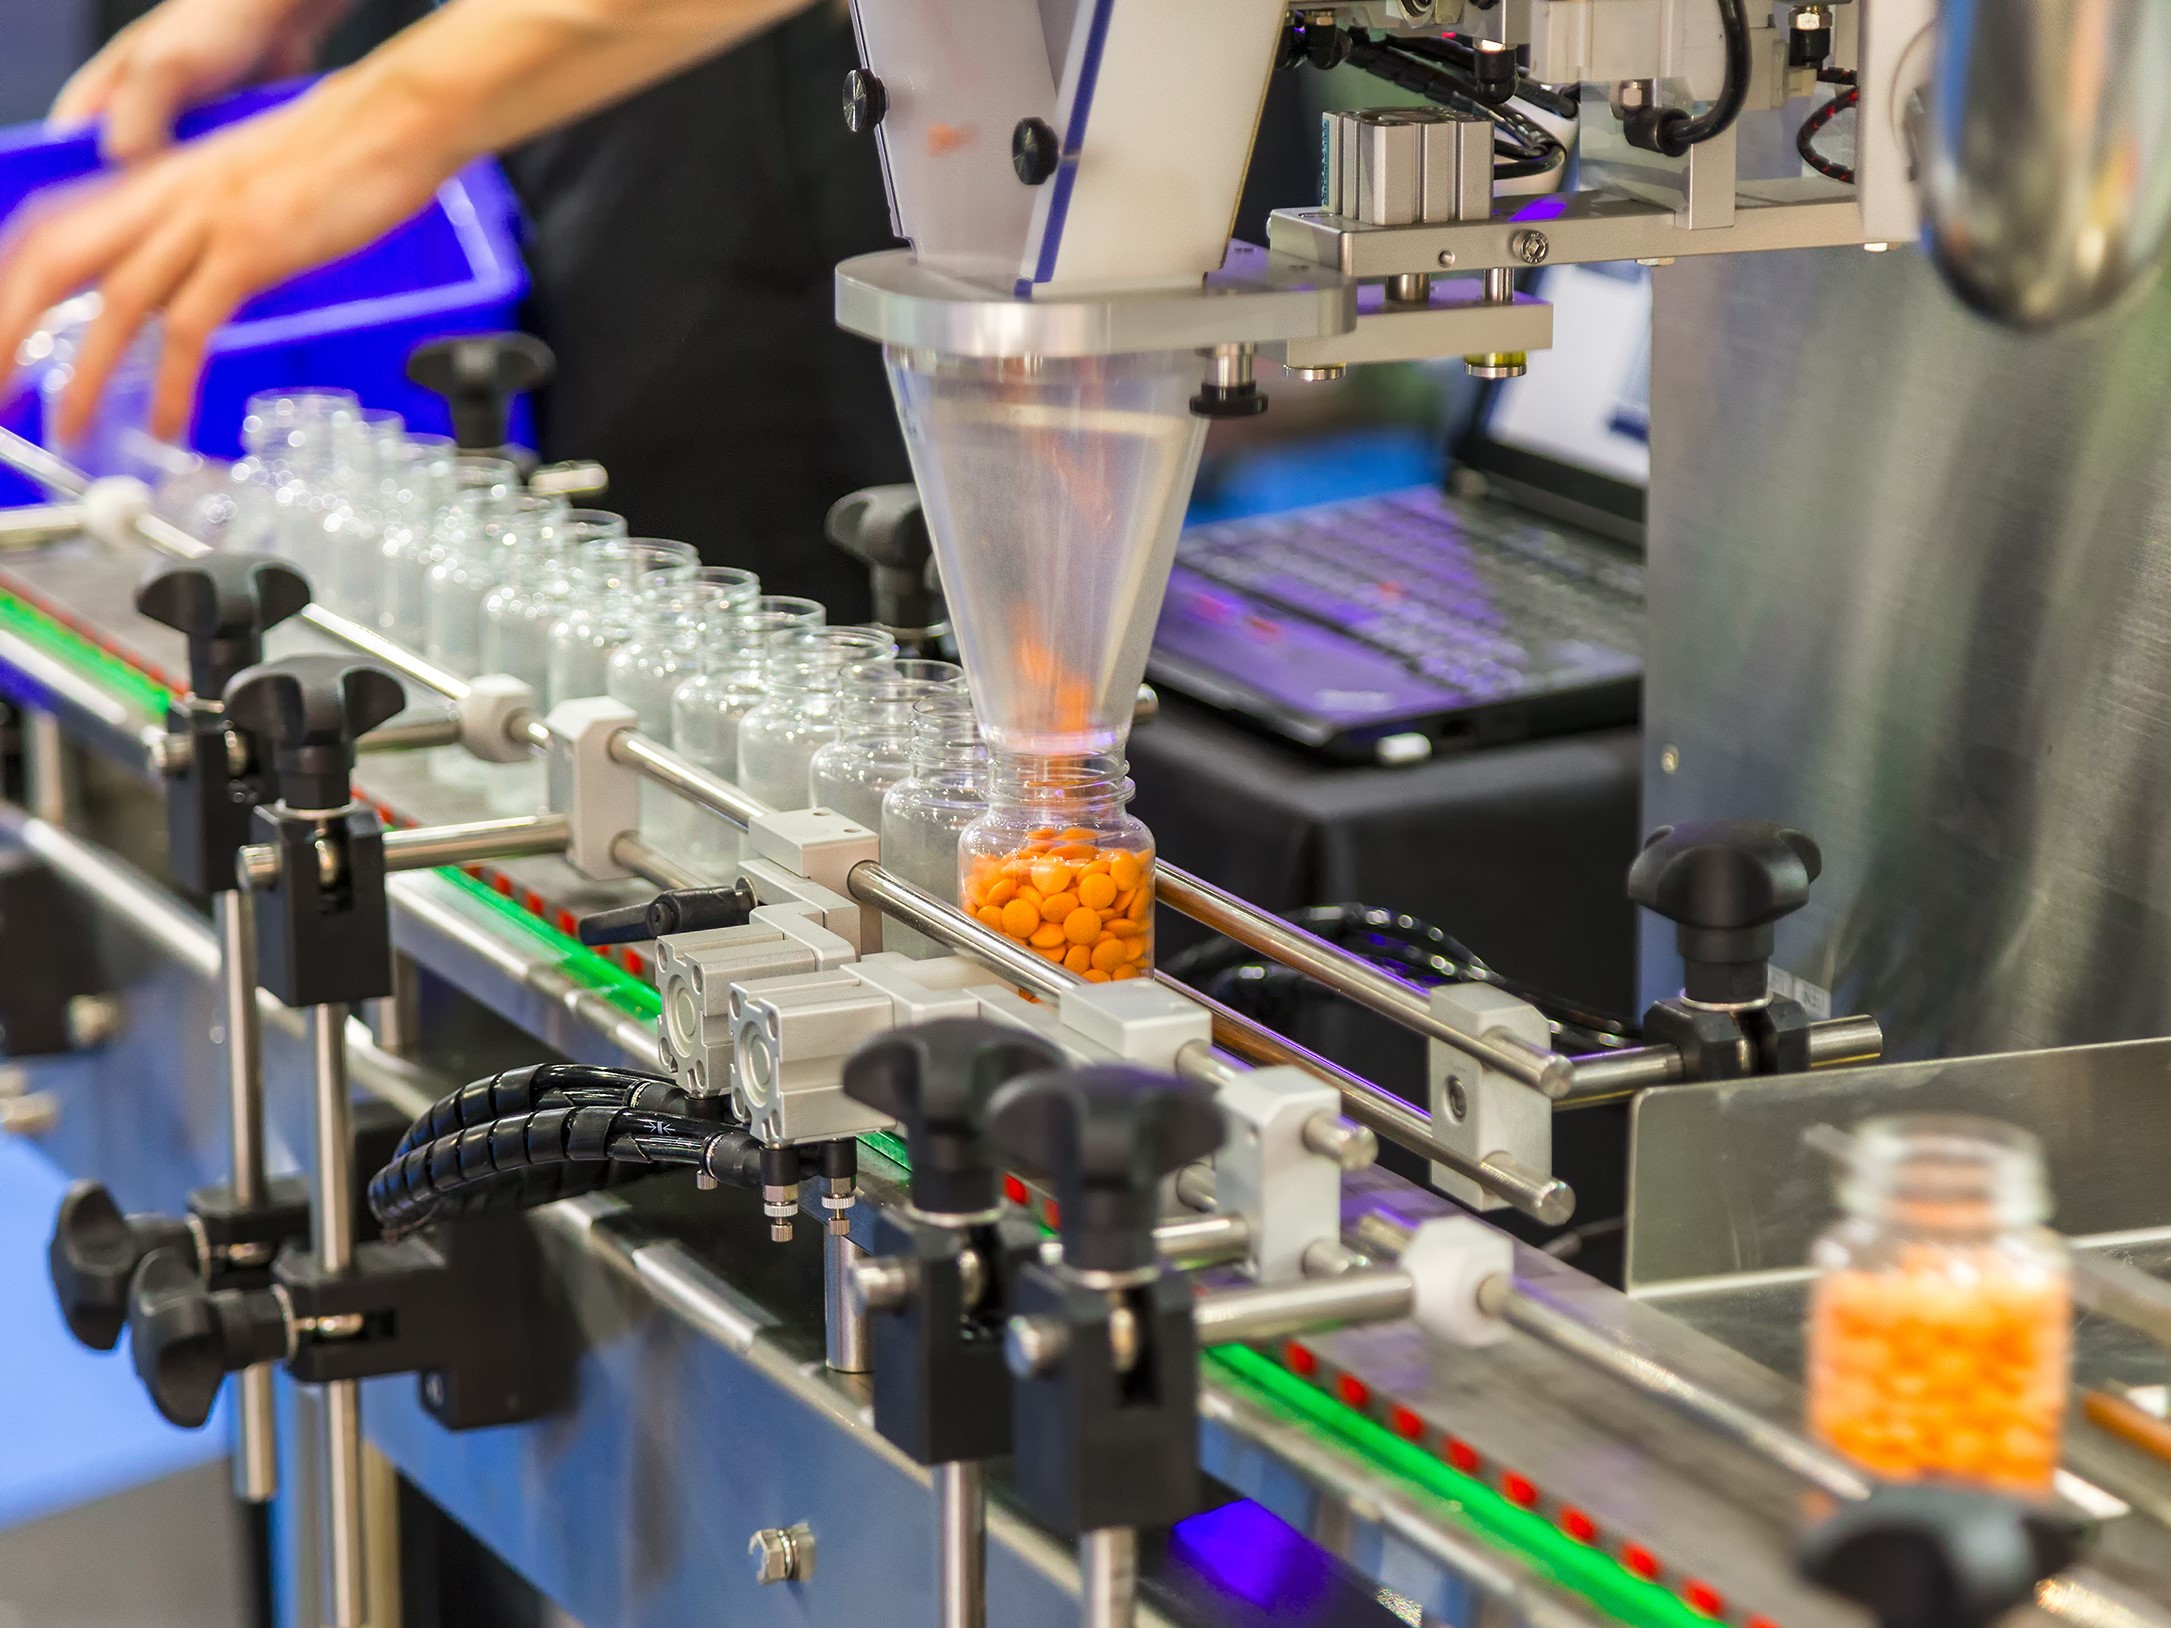 $50m in grant funding is on offer to help build supply-chain capabilities in two critical areas: biopharmaceuticals and agricultural production chemicals. Apply by COB 12 August.